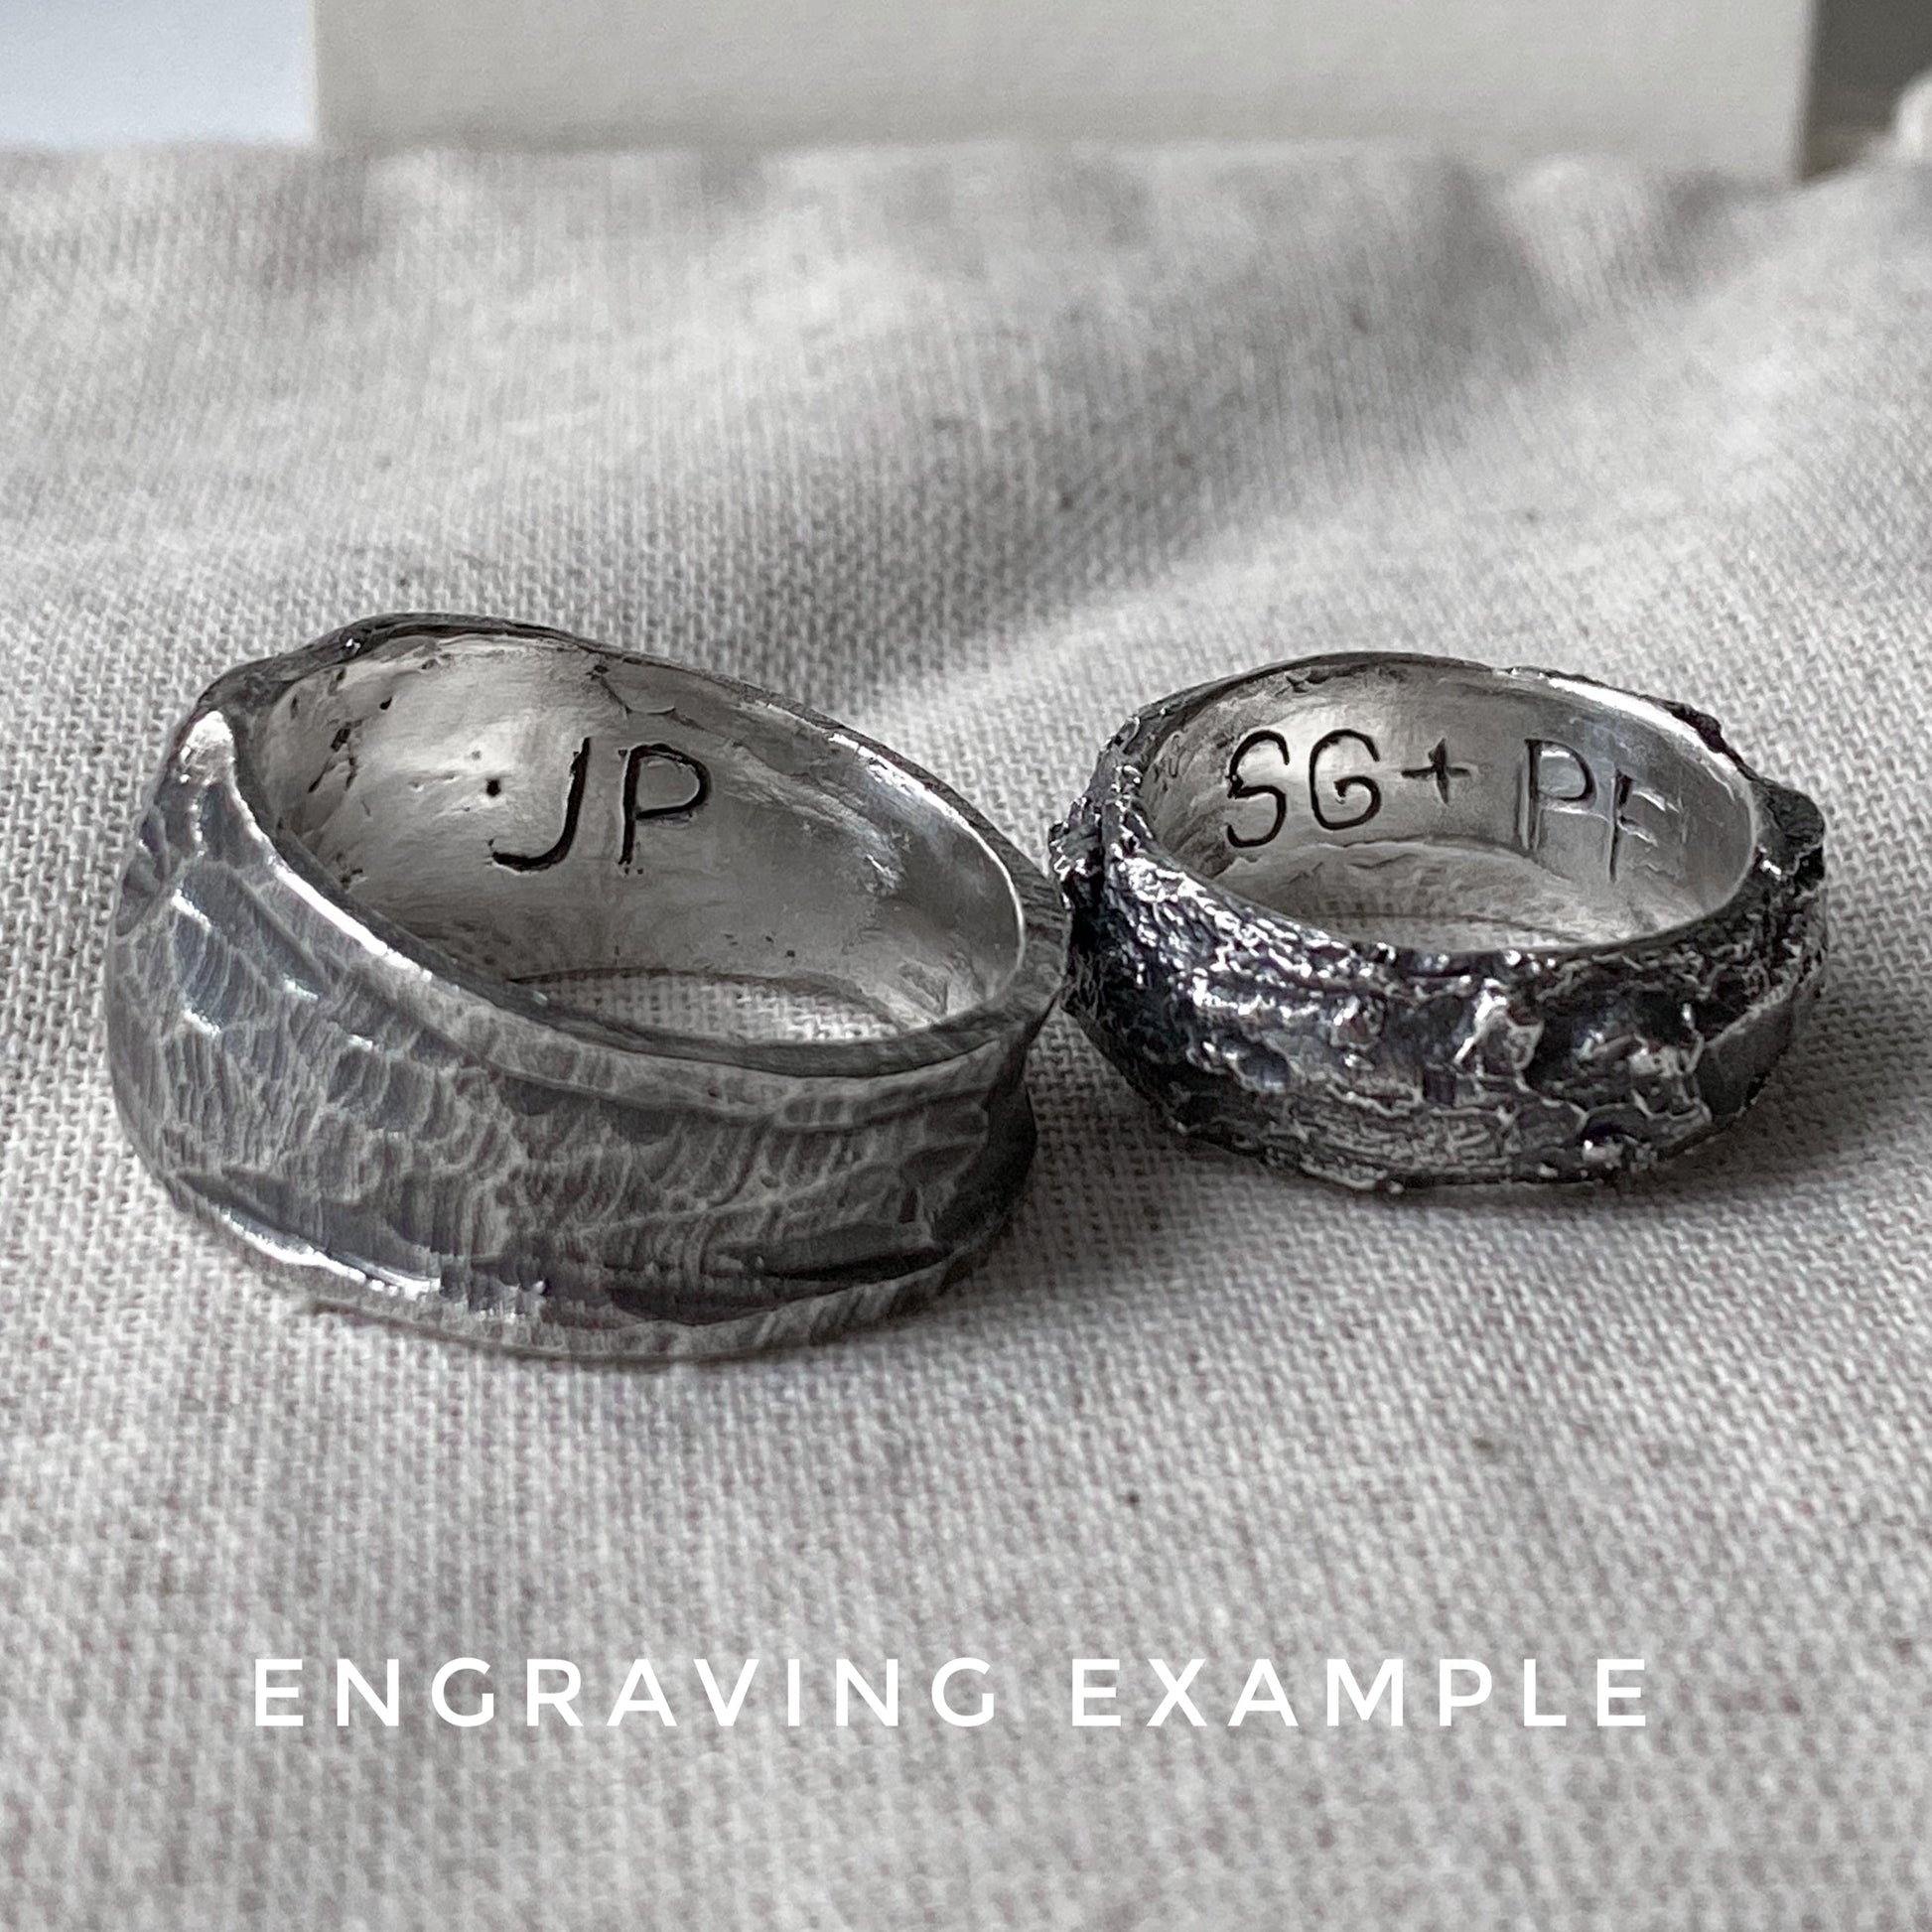 Svanetty ring - an unusual signet ring of a square shape with destroyed ethnic patterns Signet rings Project50g 